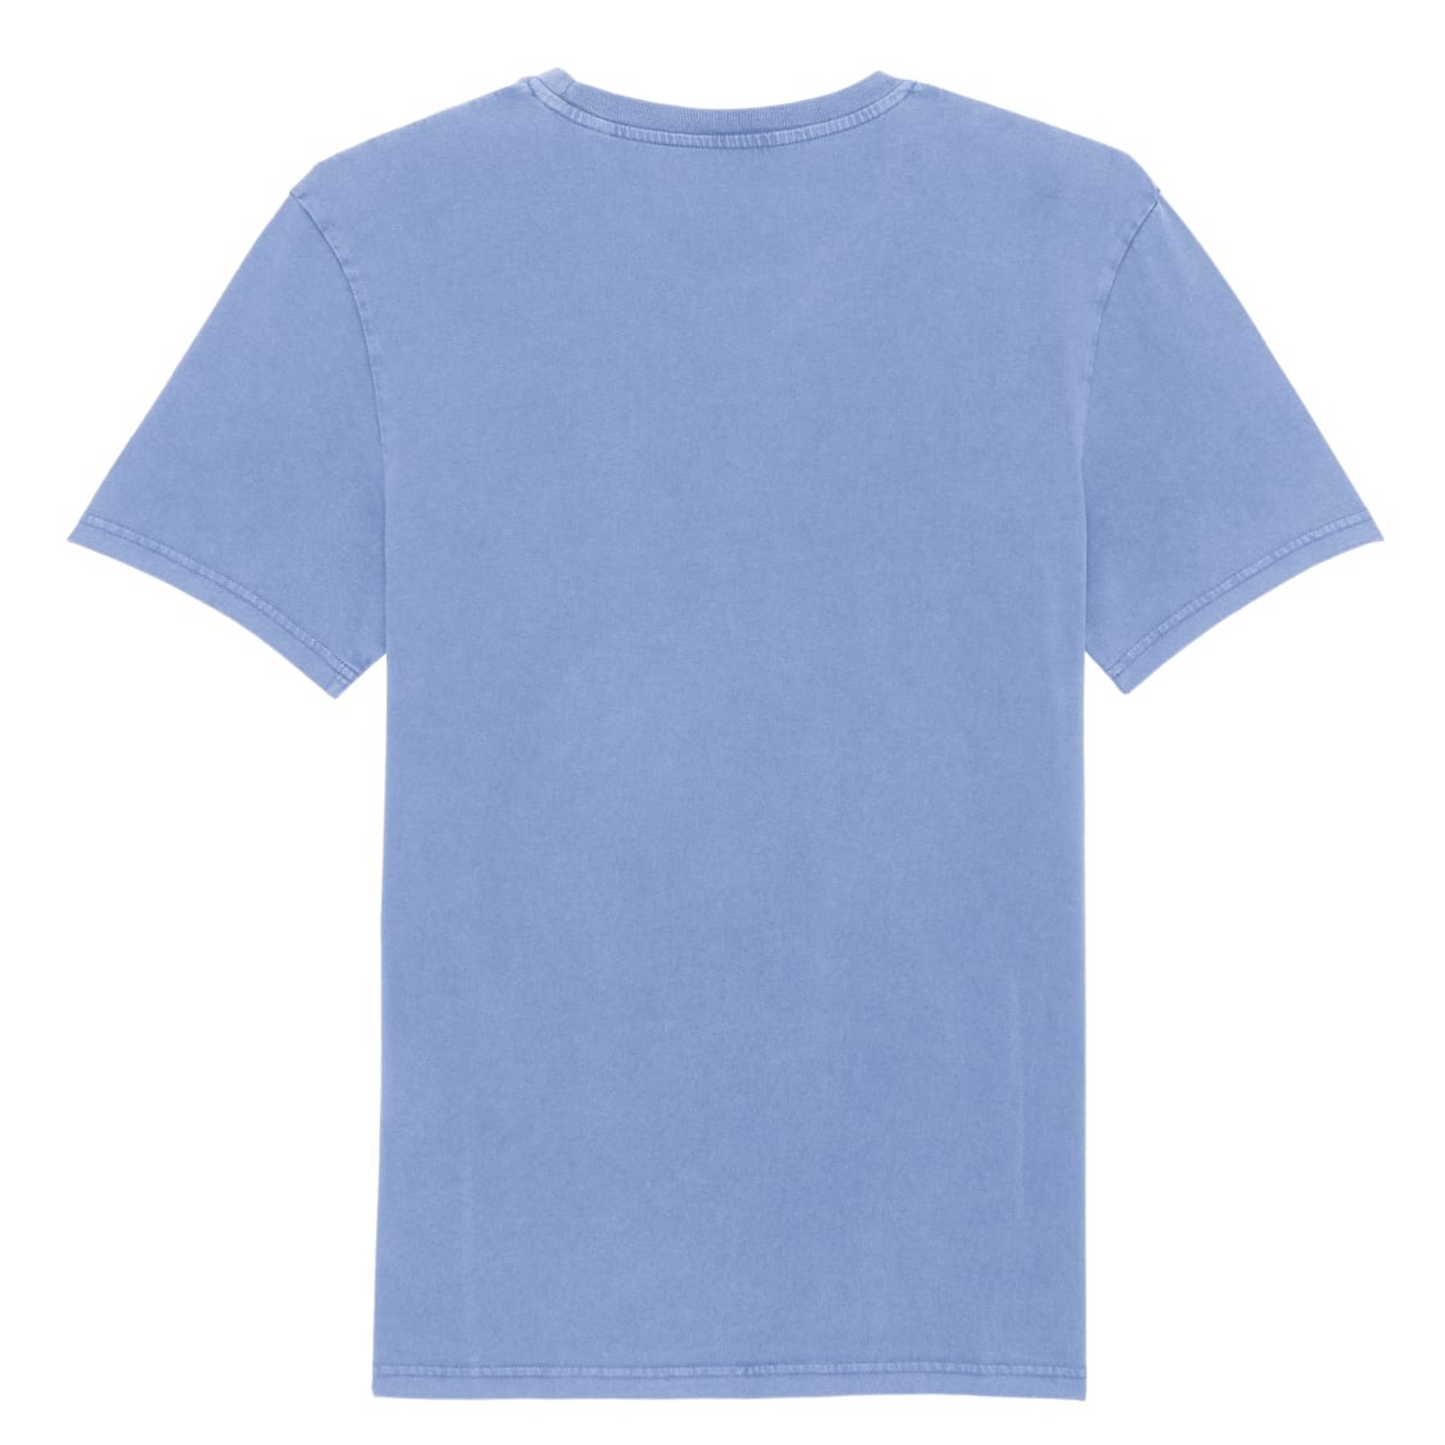 The back of our Beyond the Sea t-shirt from the Vintage Rocks collection of tees. Exclusively from Waves and Wild Water, this sea blue t-shirt is constructed from organic cotton and has been individually garment dyed to create a vintage look.